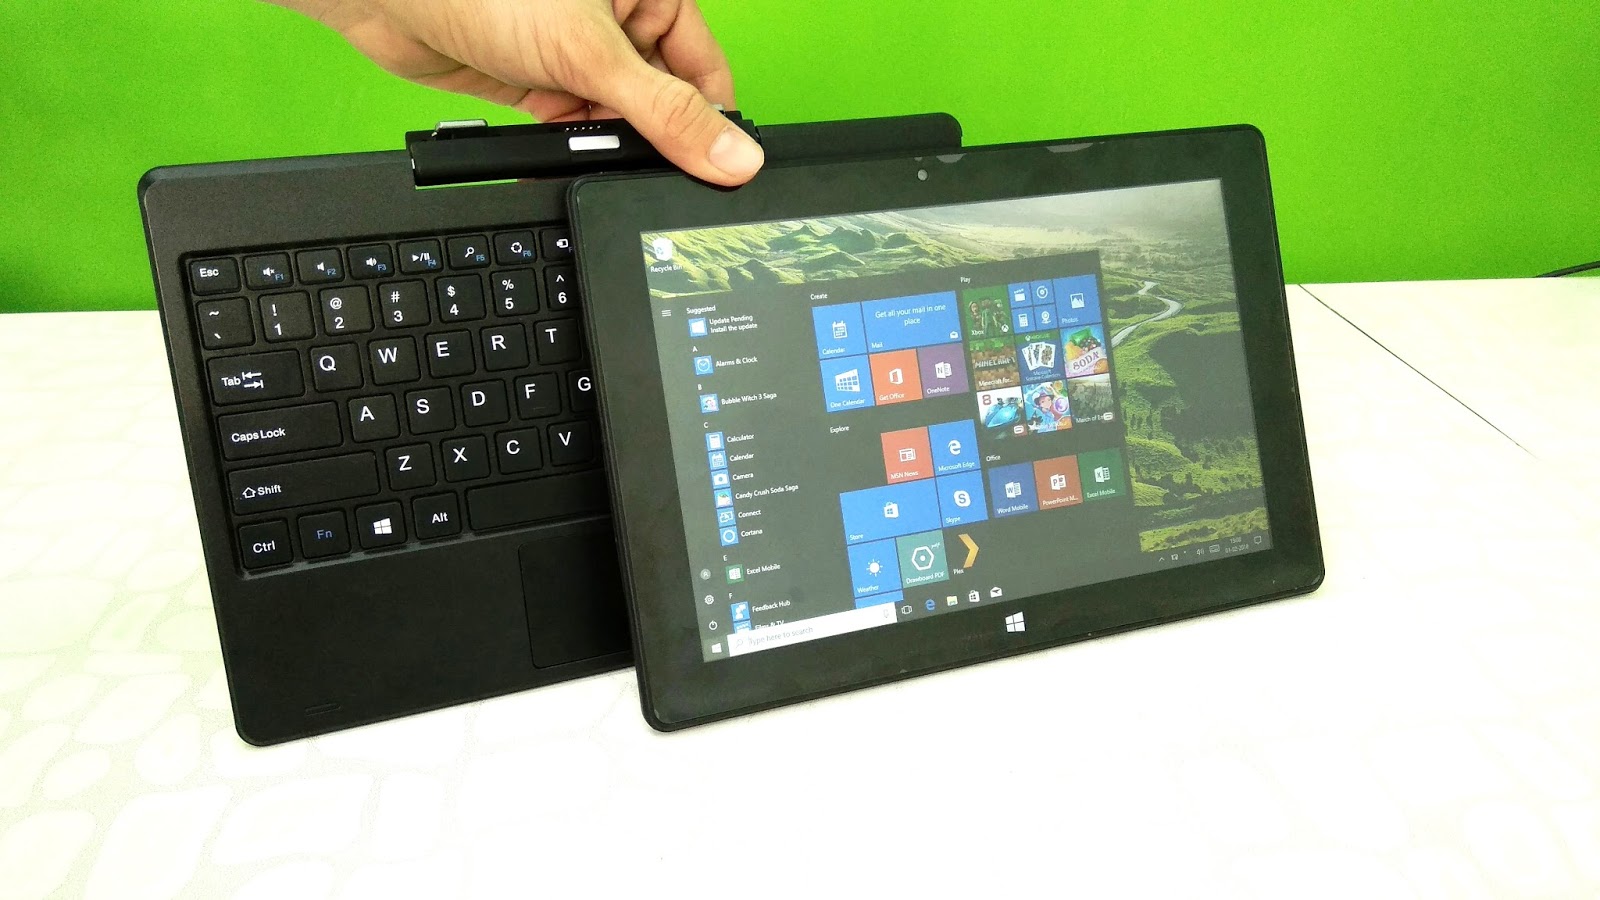 Learn New Things: Budget Mini Windows 10 Laptop (Acer One 110) Price, Spec & Hands On